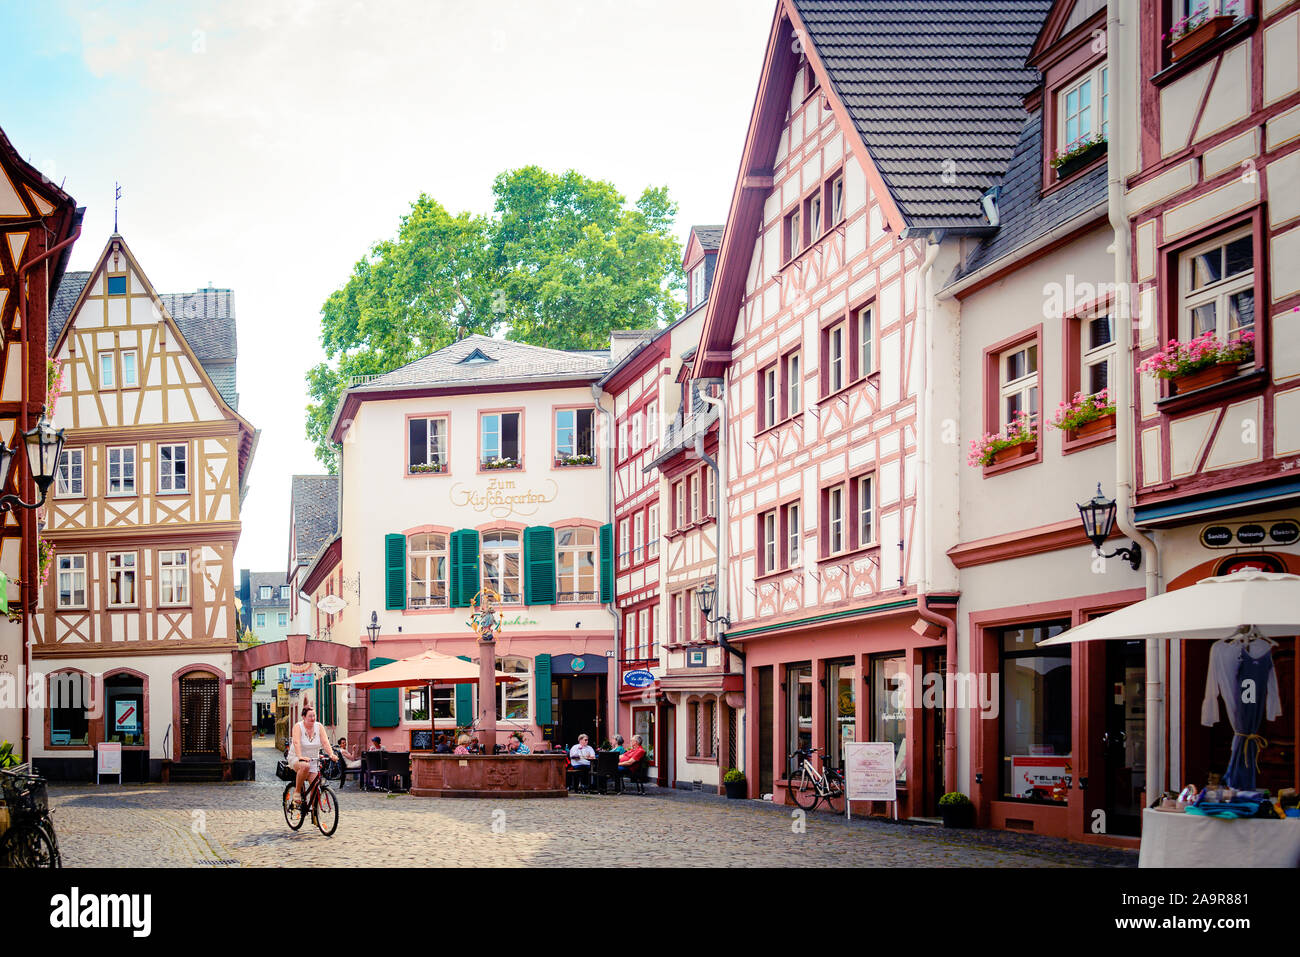 MAINZ, Germany - 21 July 2018. Old part of the town with typical picturesque buildings Stock Photo